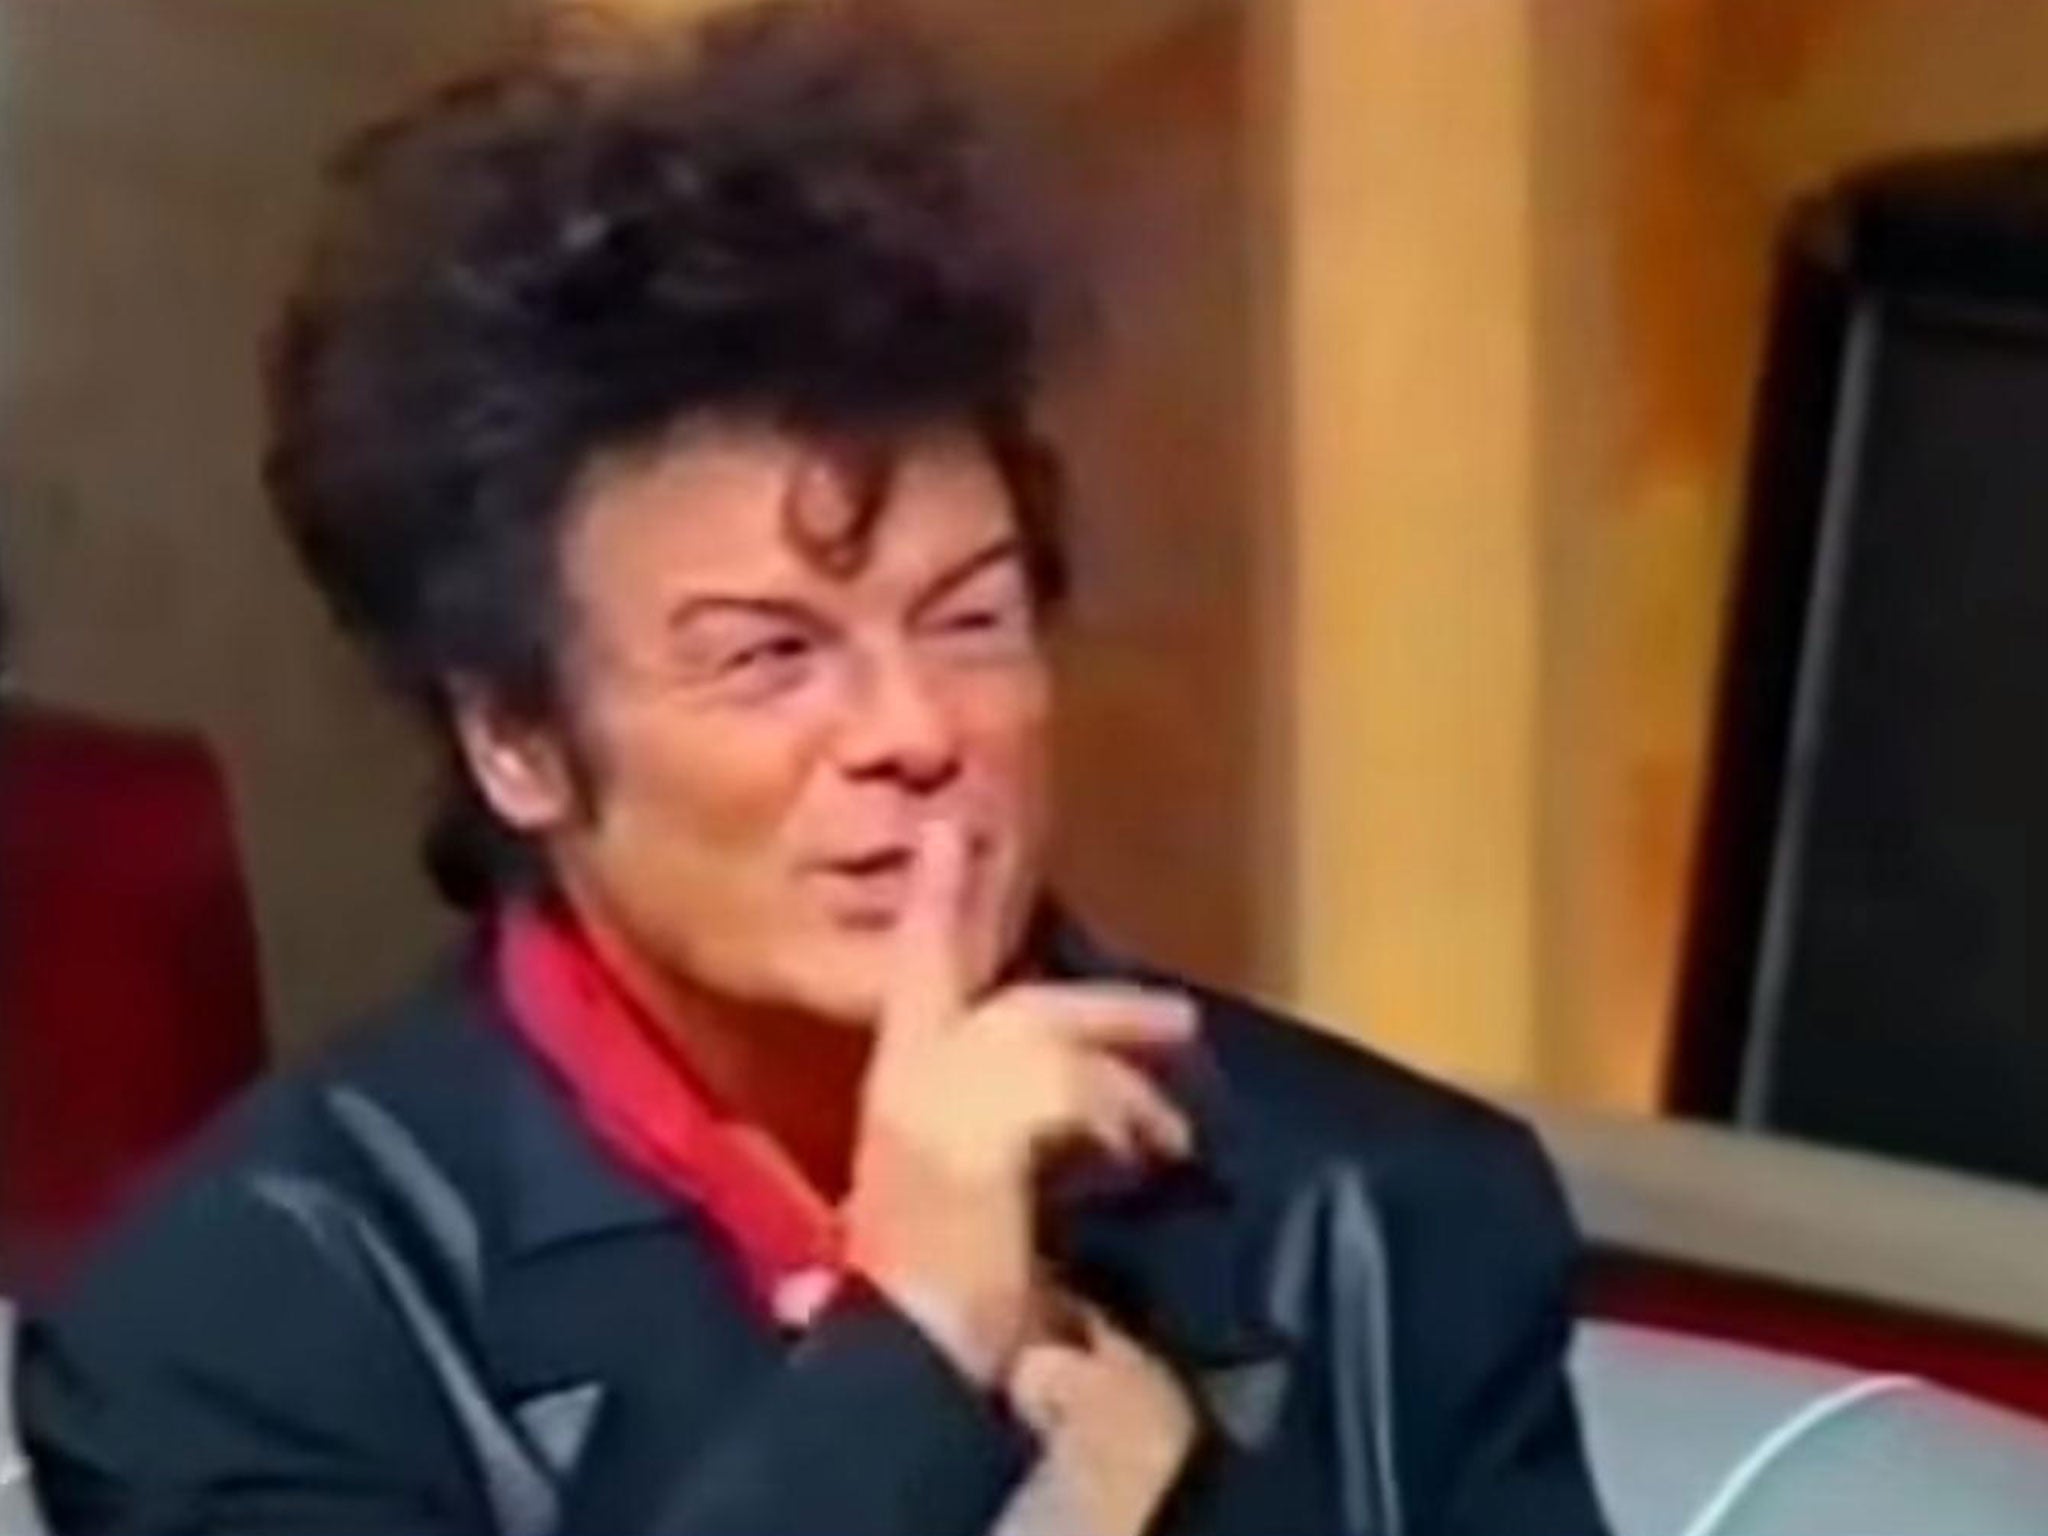 Gary Glitter shushes Tessa Dahl on 'This Is Your Life' in 1992